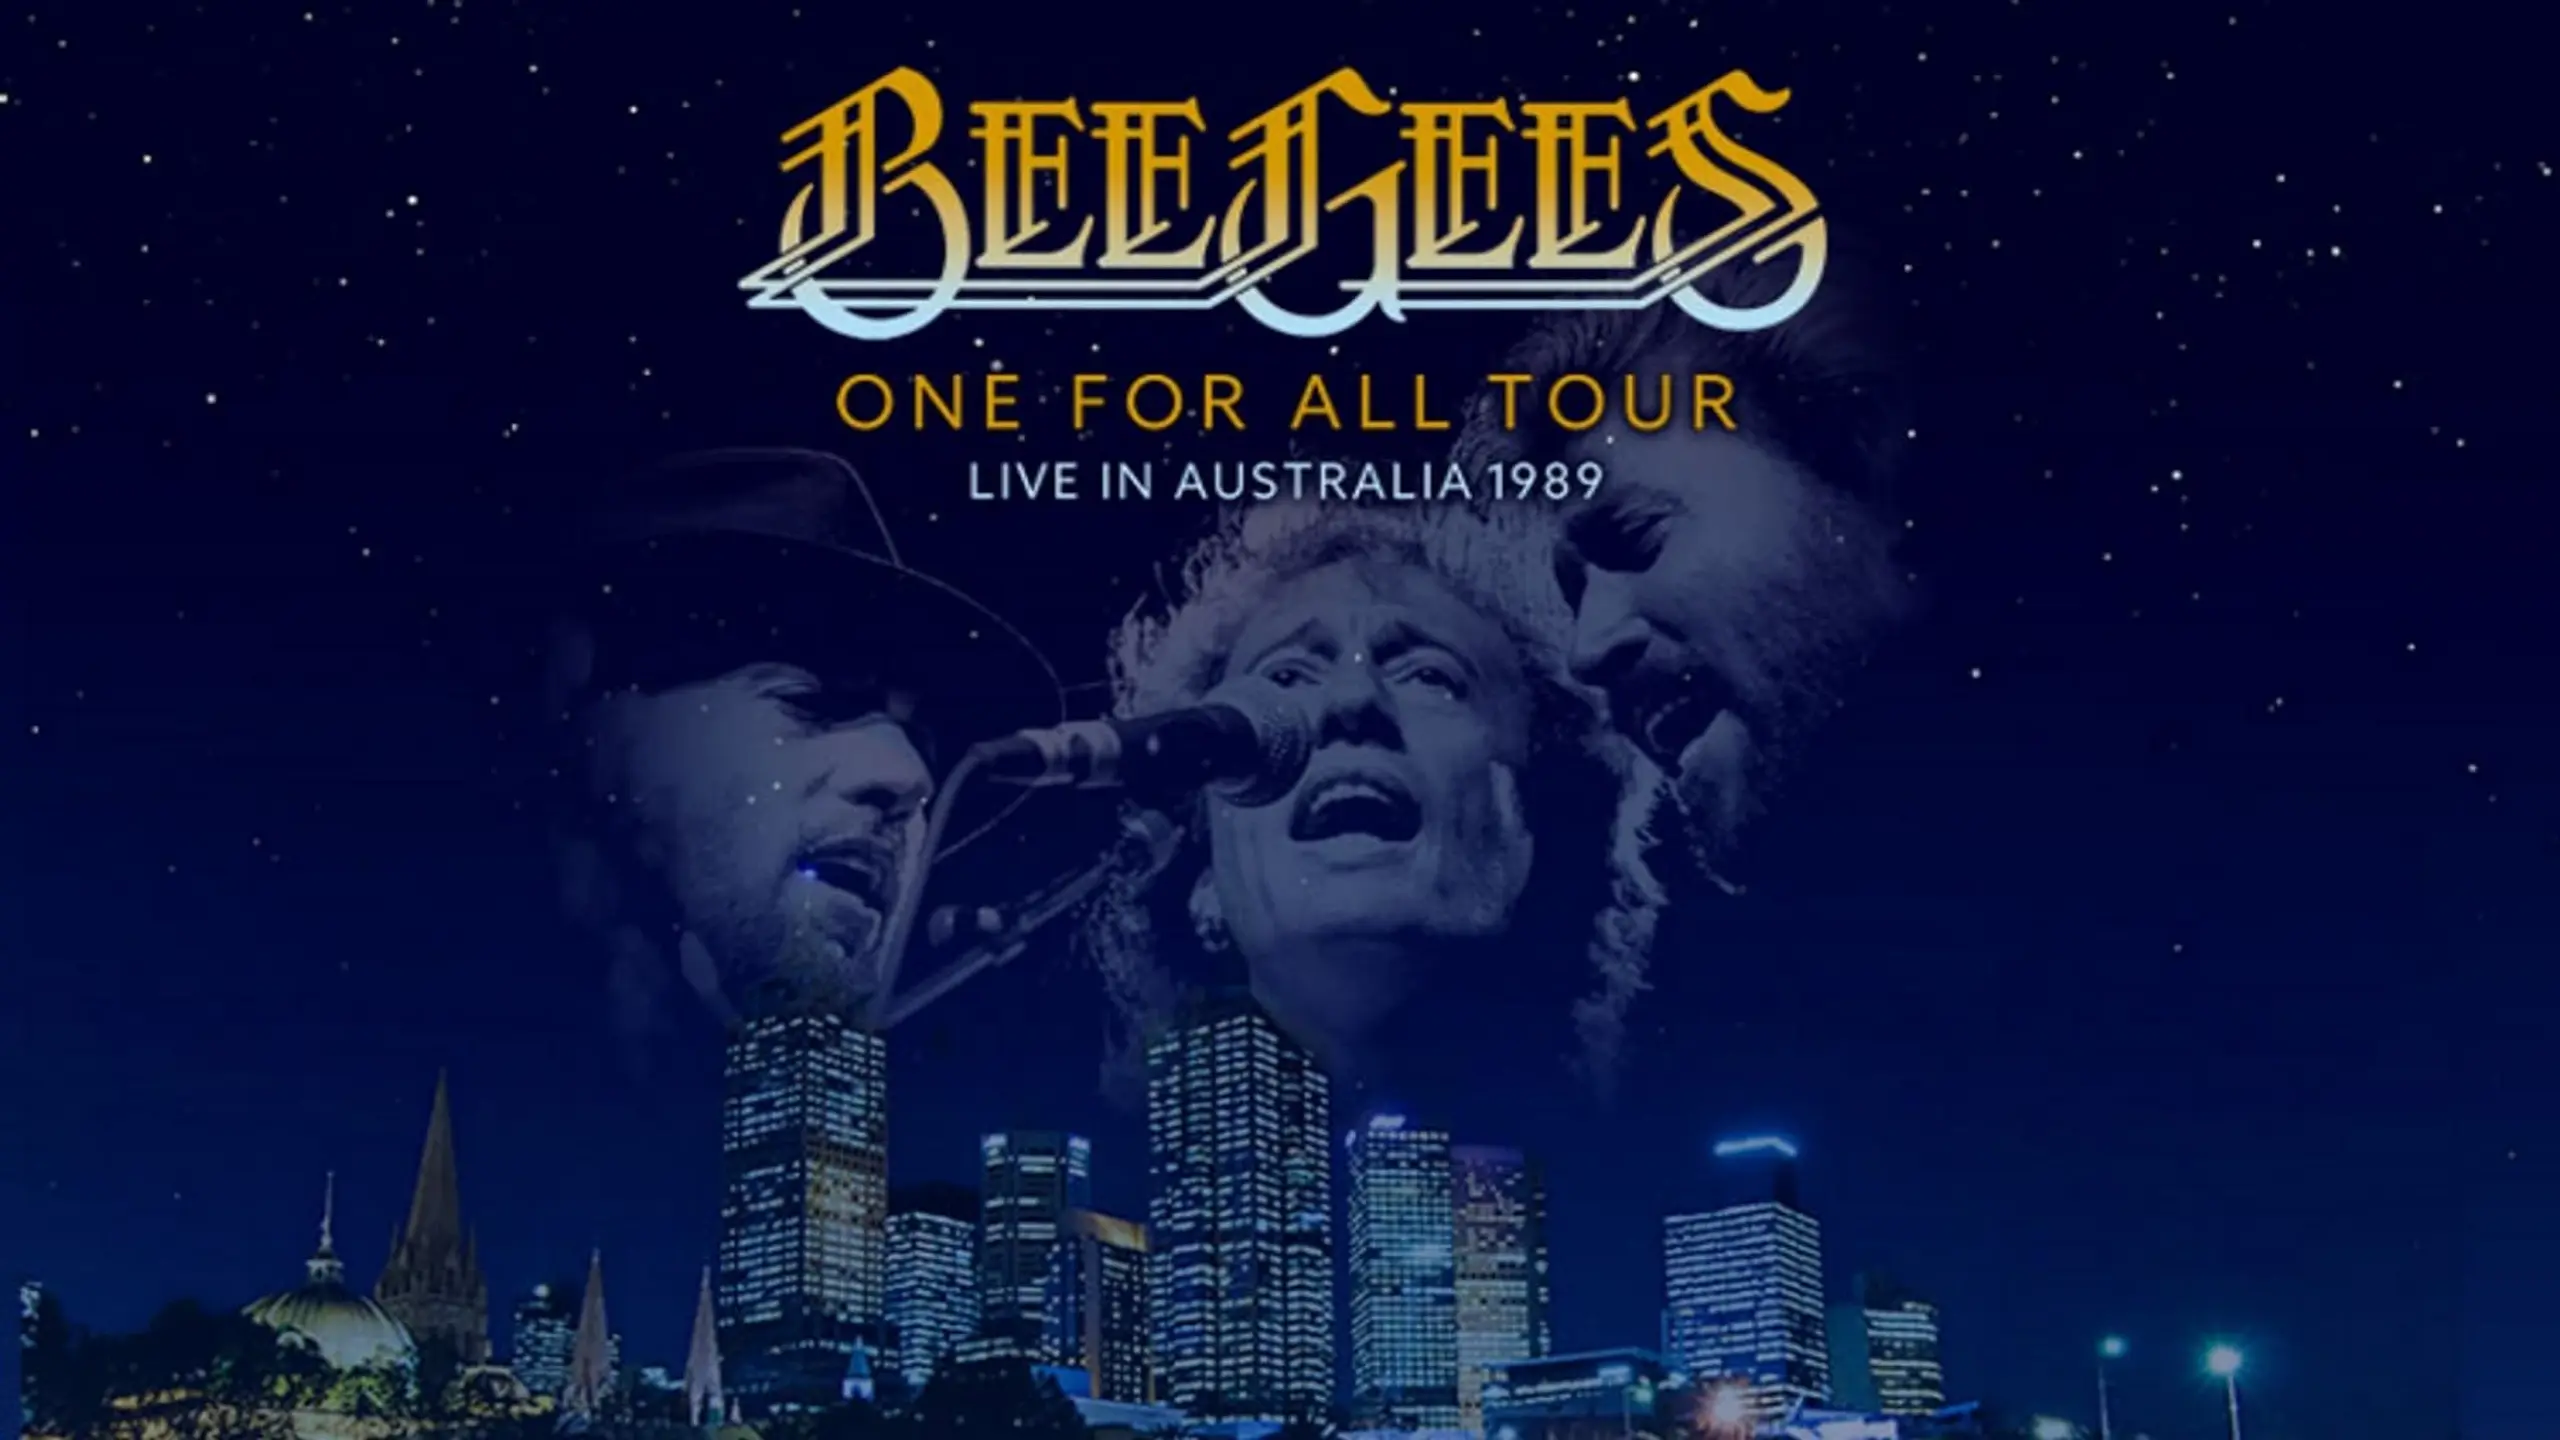 Bee Gees: One for All Tour - Live in Australia